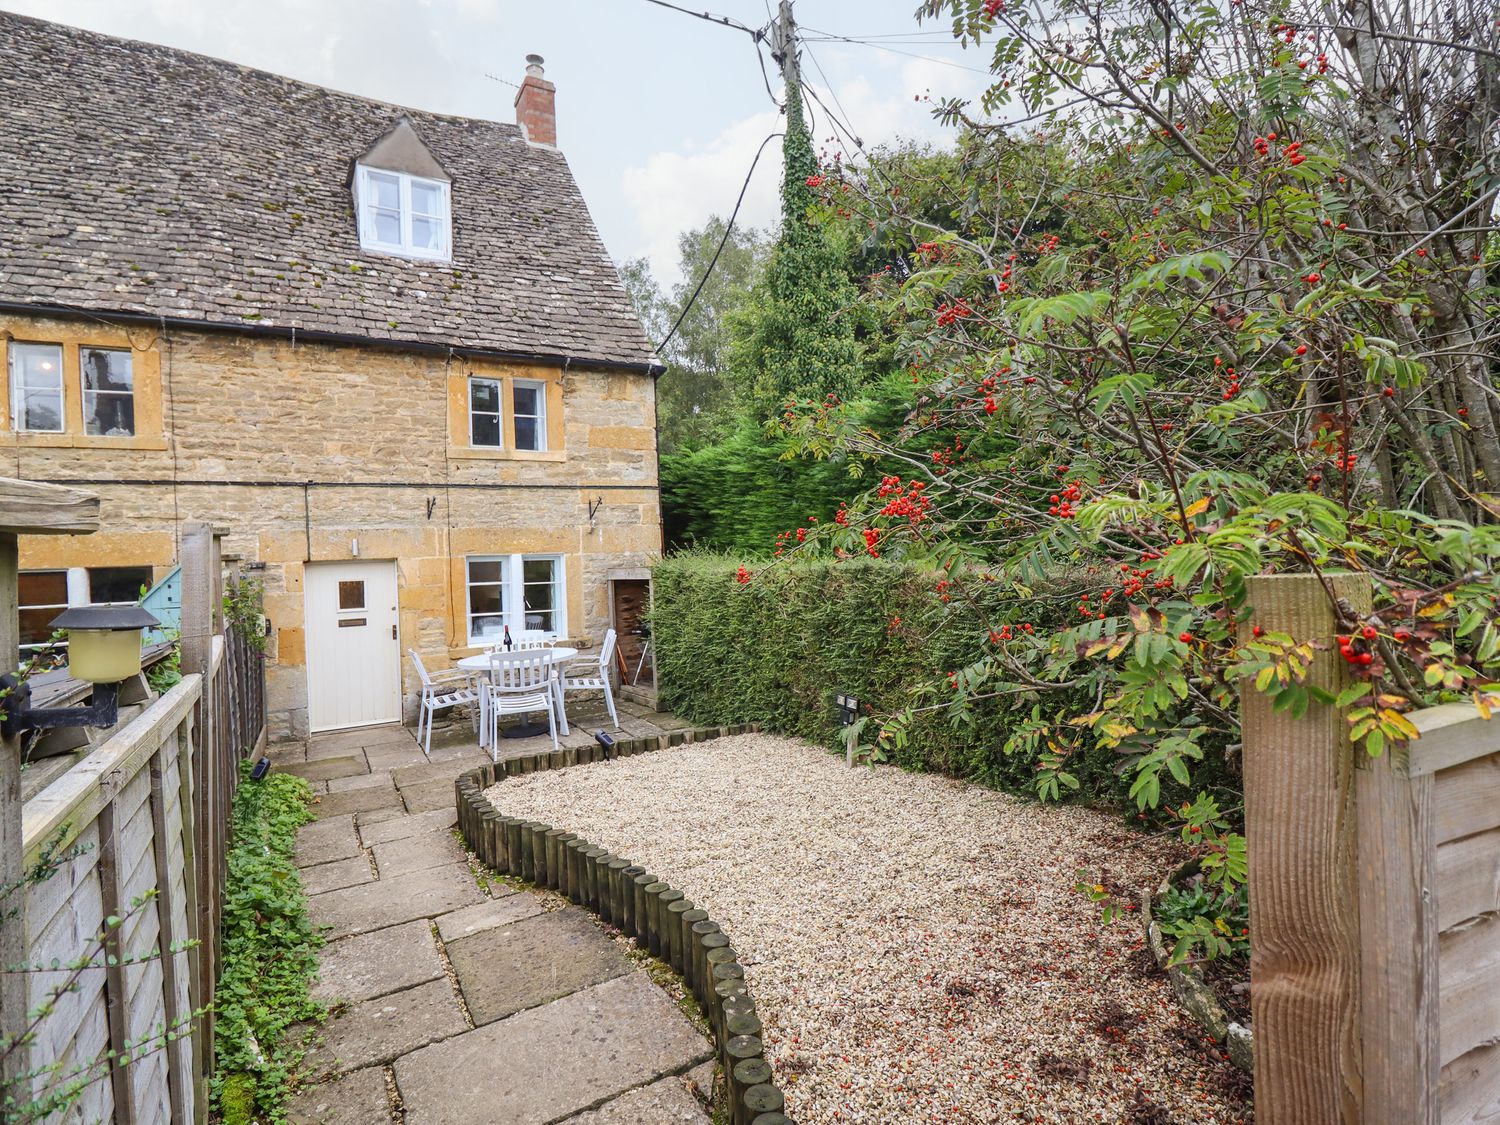 Gleed Cottage - Cotswolds - 1091196 - photo 1